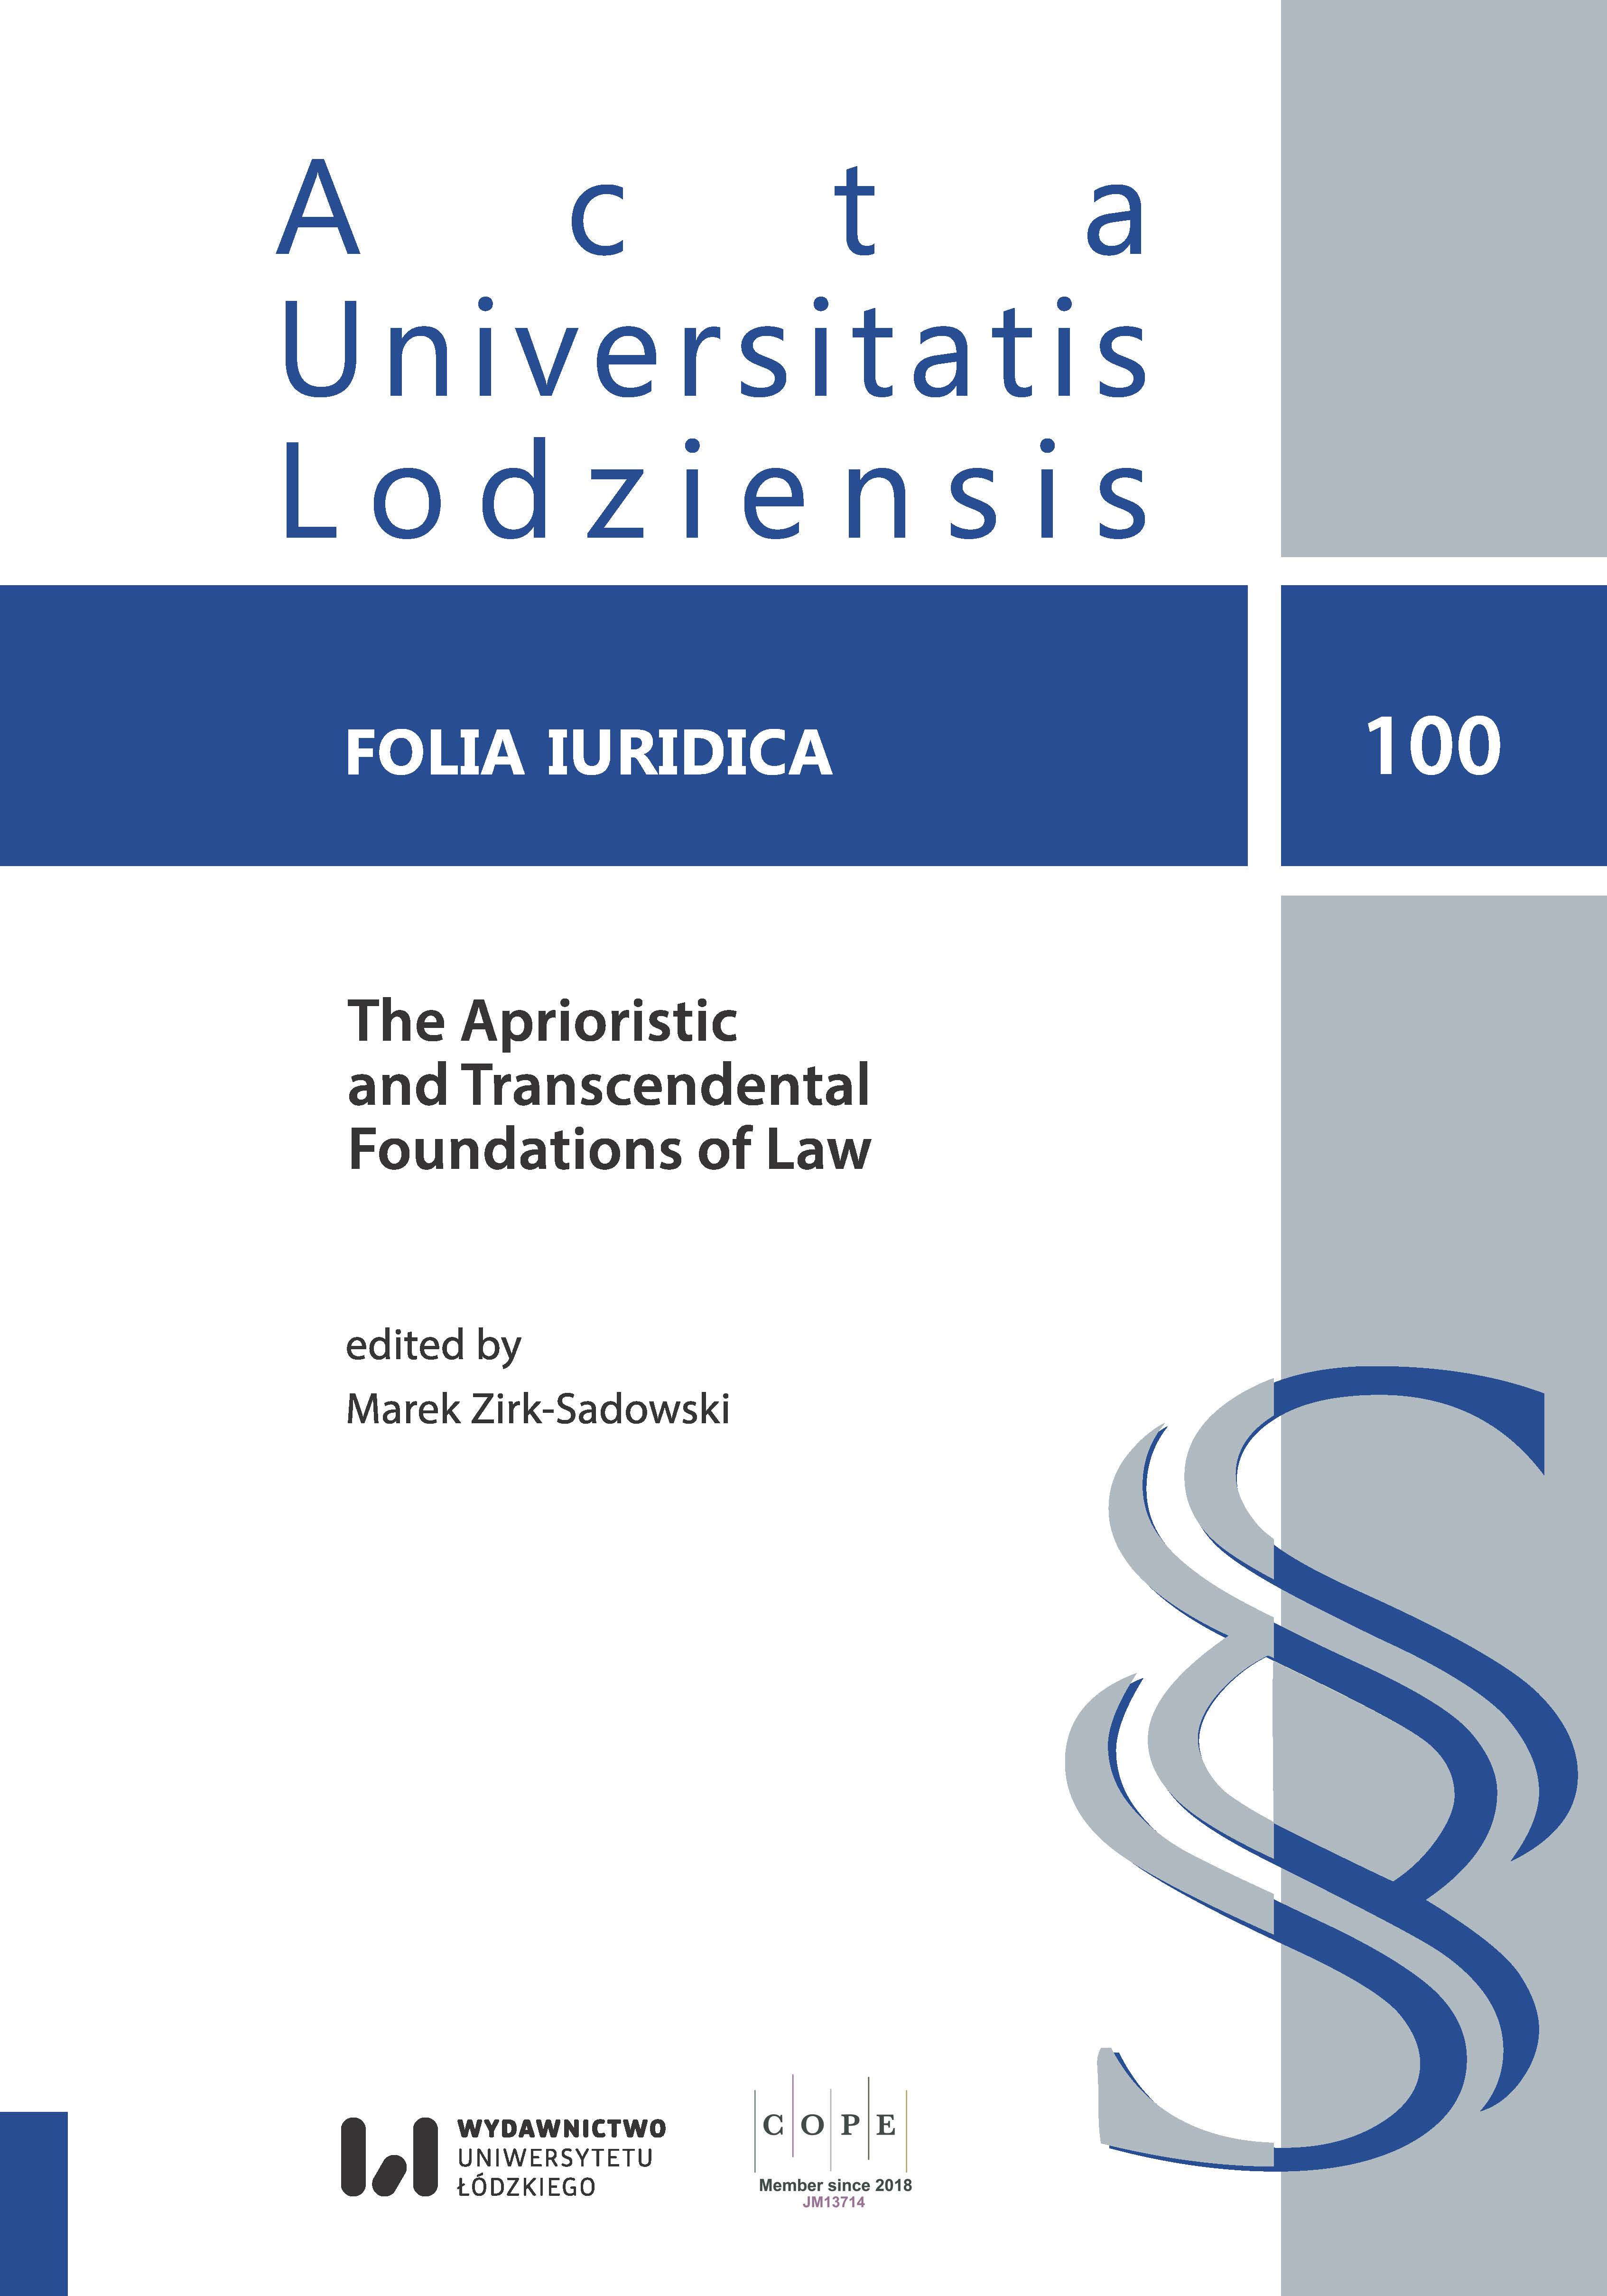 Between Aprioristic and Transcendental Foundations of Legal Institutions: Professor Tomasz Bekrycht and His Interpretation of the Philosophical Foundations of Law (Introduction) Cover Image